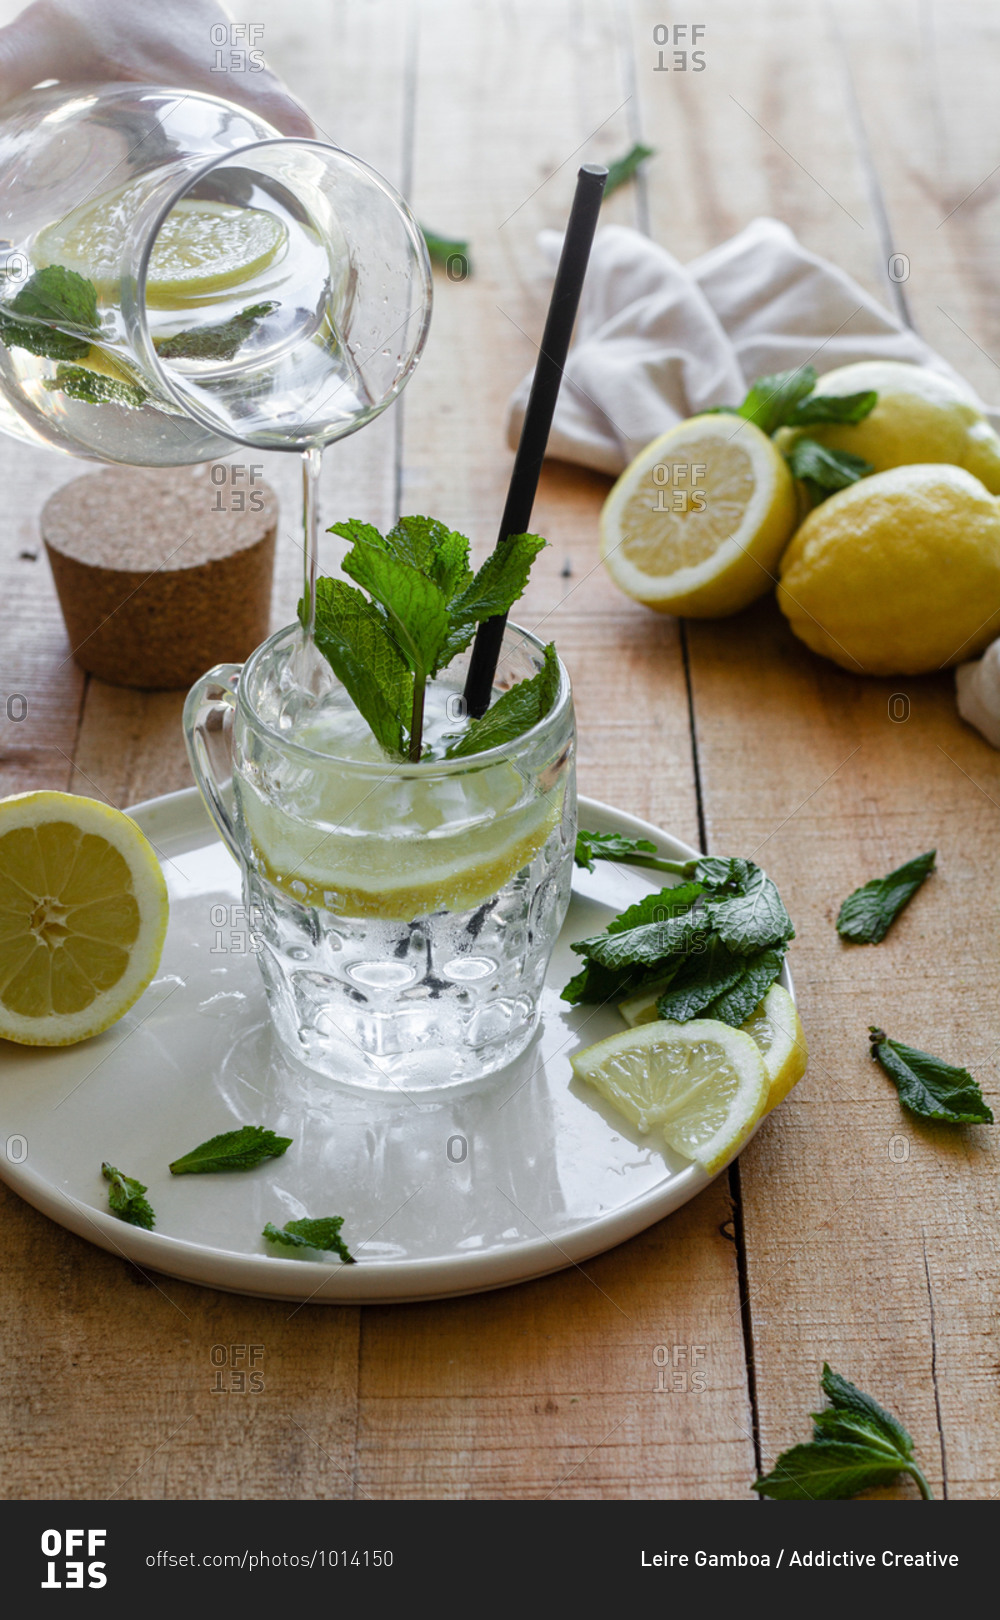 Cold refreshing drink with soda water and lemon garnished with fresh mint leaves served on glass cup with straw on wooden table